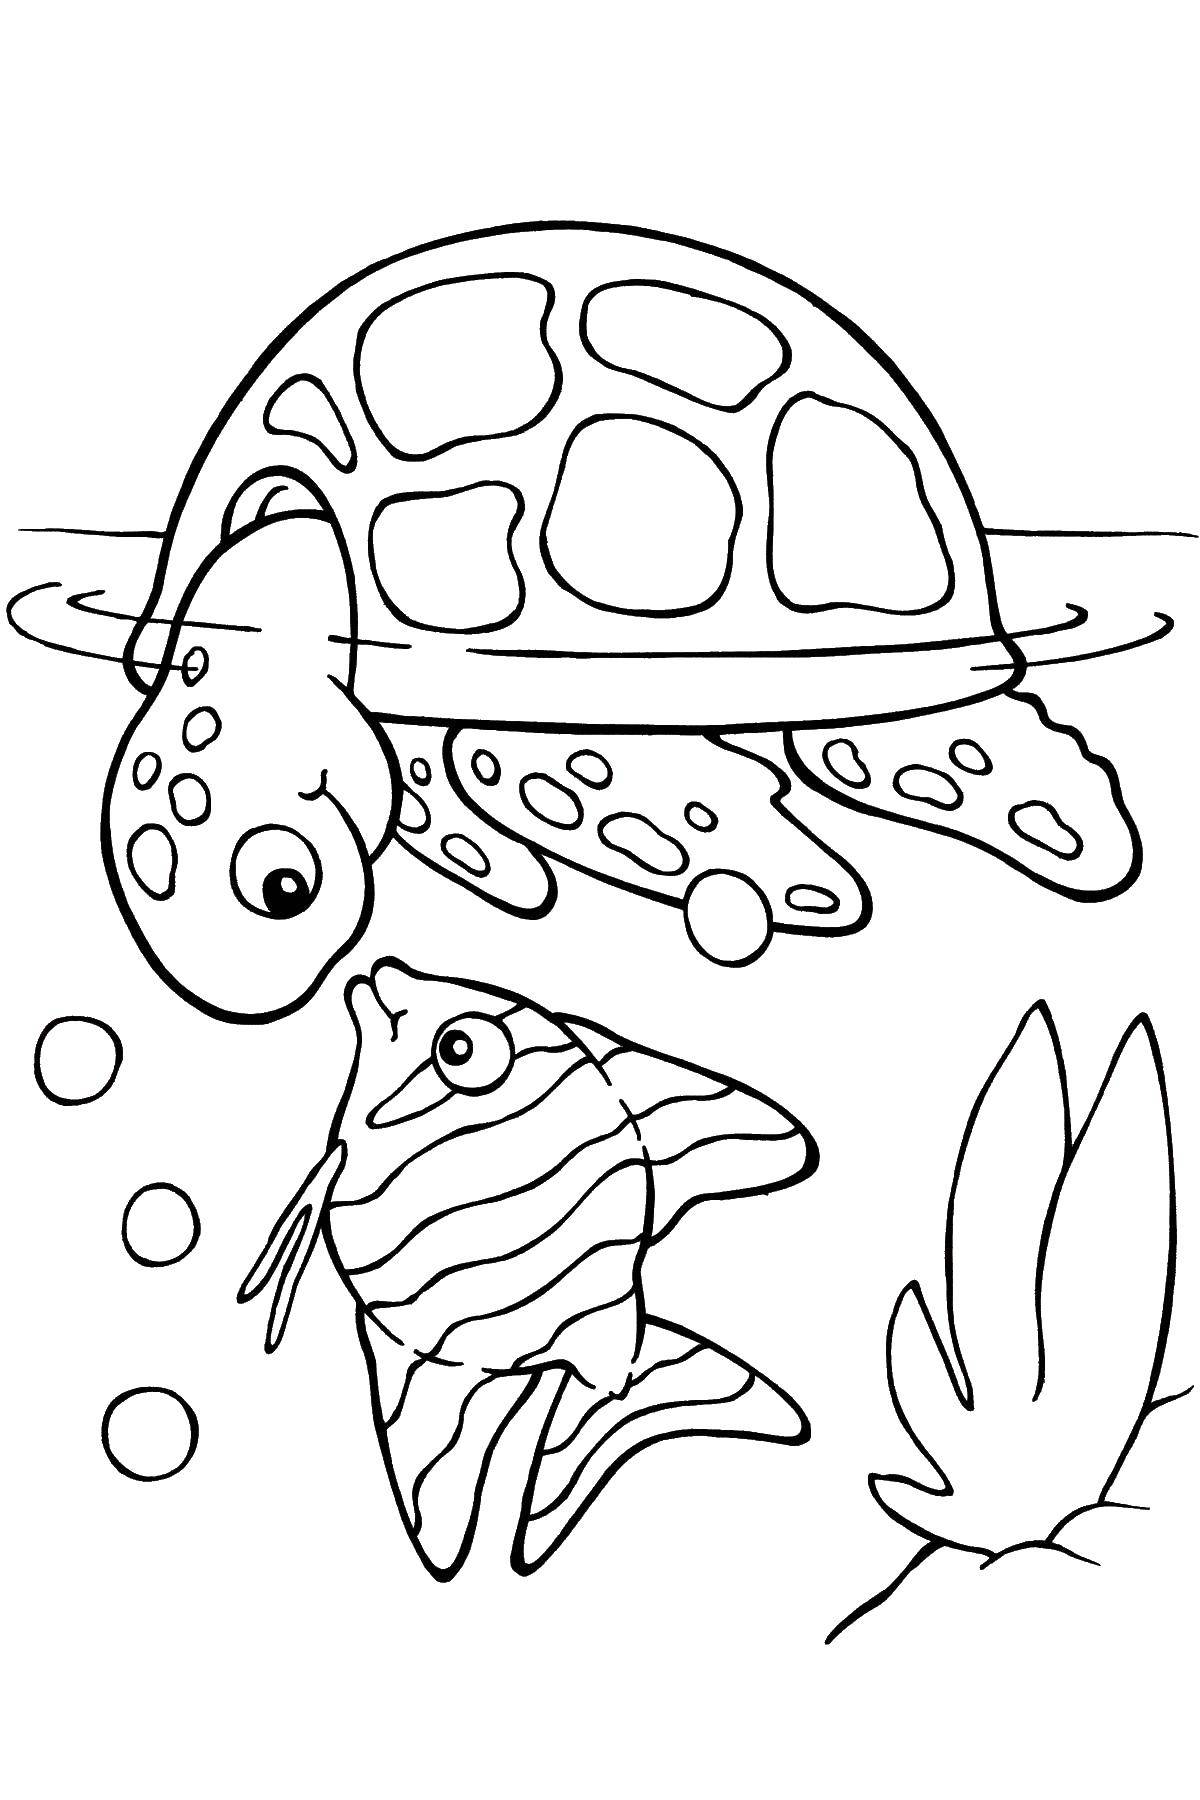 Coloring The turtle is an interesting fish. Category Turtle. Tags:  Reptile, turtle.